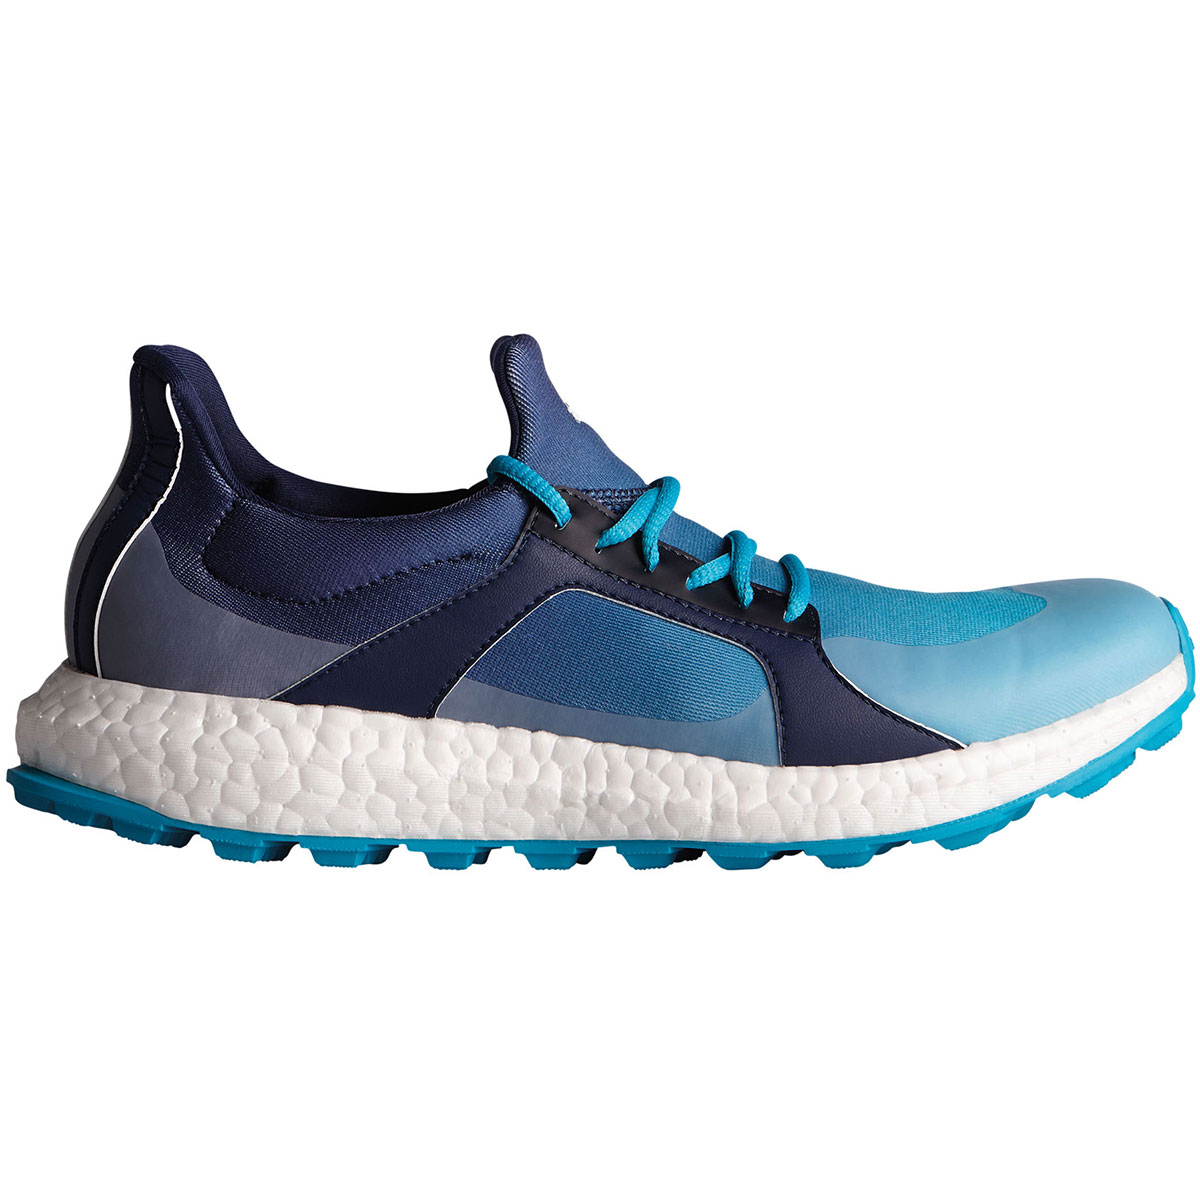 adidas ladies climacross boost golf shoes